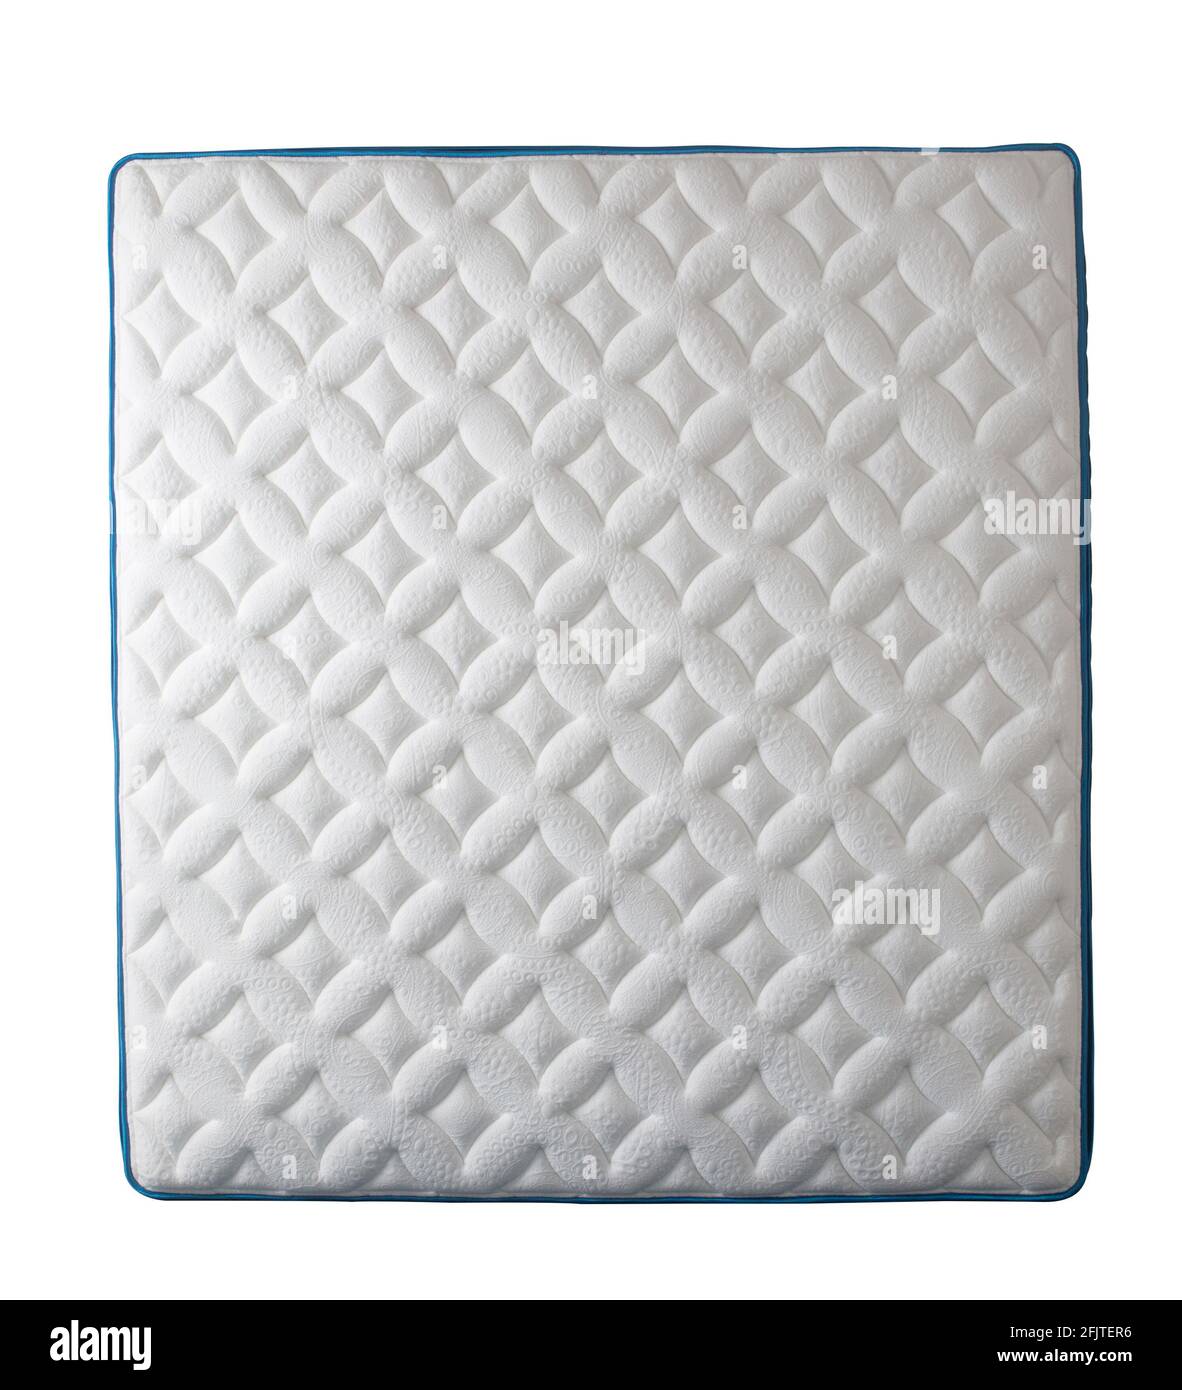 Top view of white mattress, soft and luxury mattress isolated on white background Stock Photo